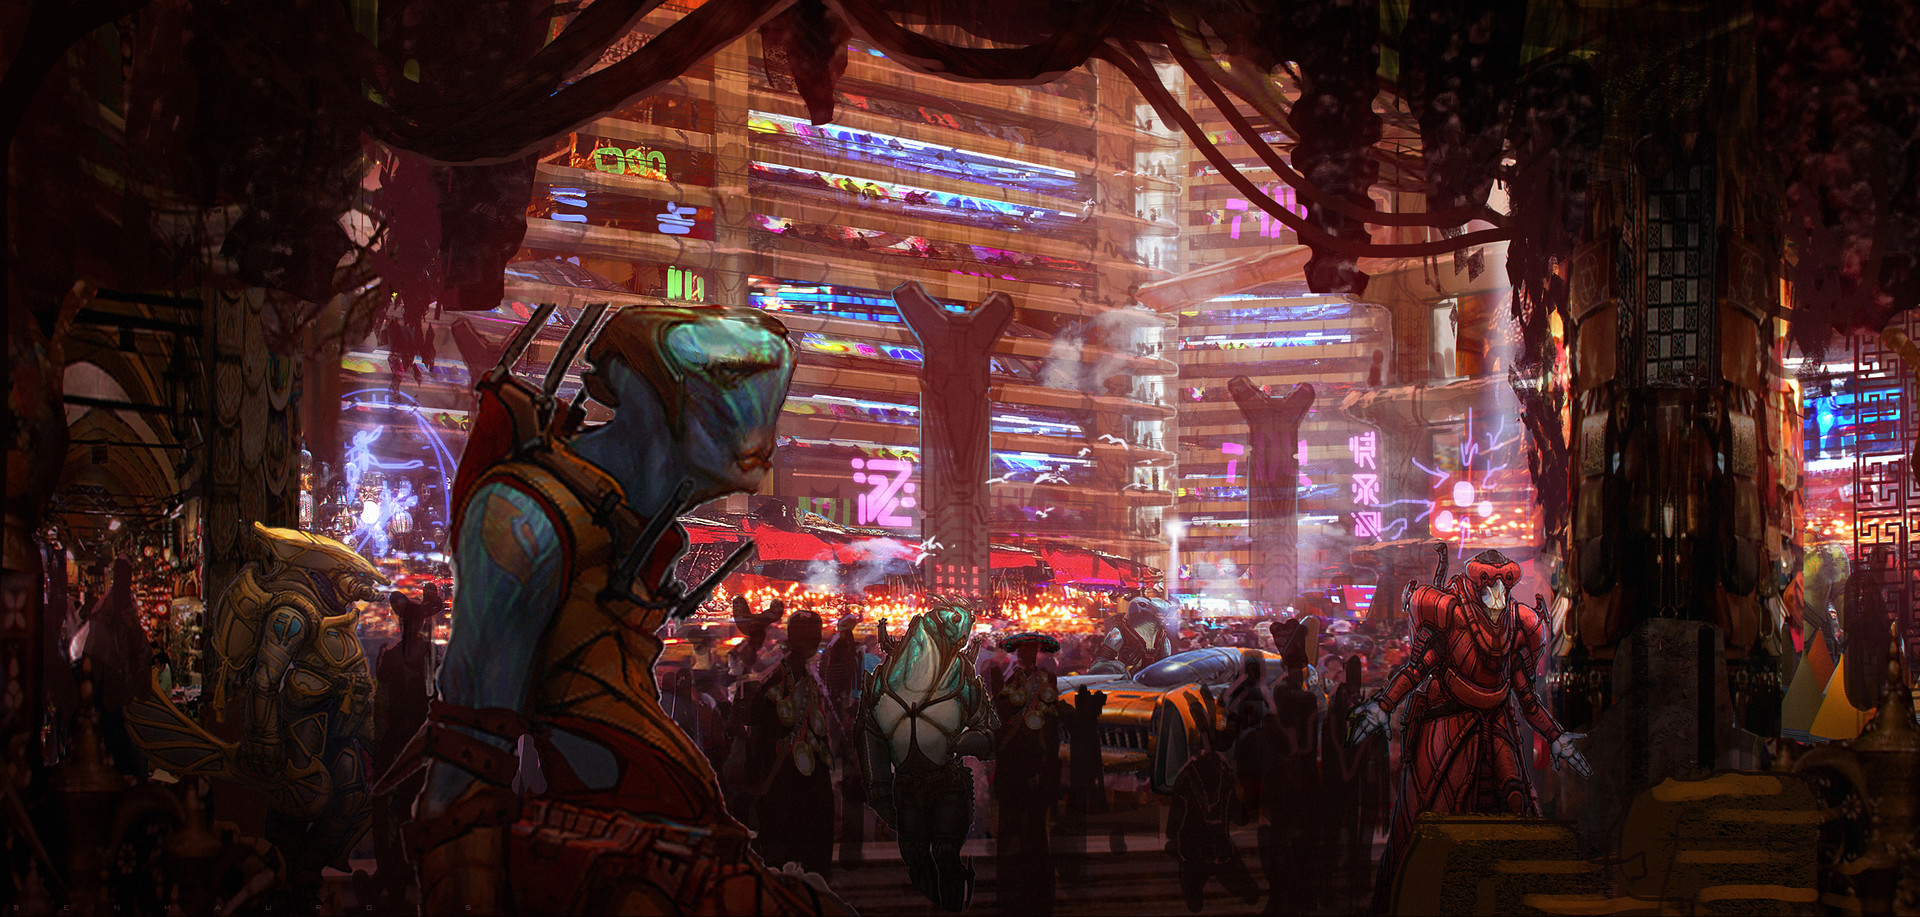 crowds, Ben Mauro, Valerian and the City of a Thousand Planets, Concept cars, Big Market, Aliens, Colorful, Science fiction Wallpaper